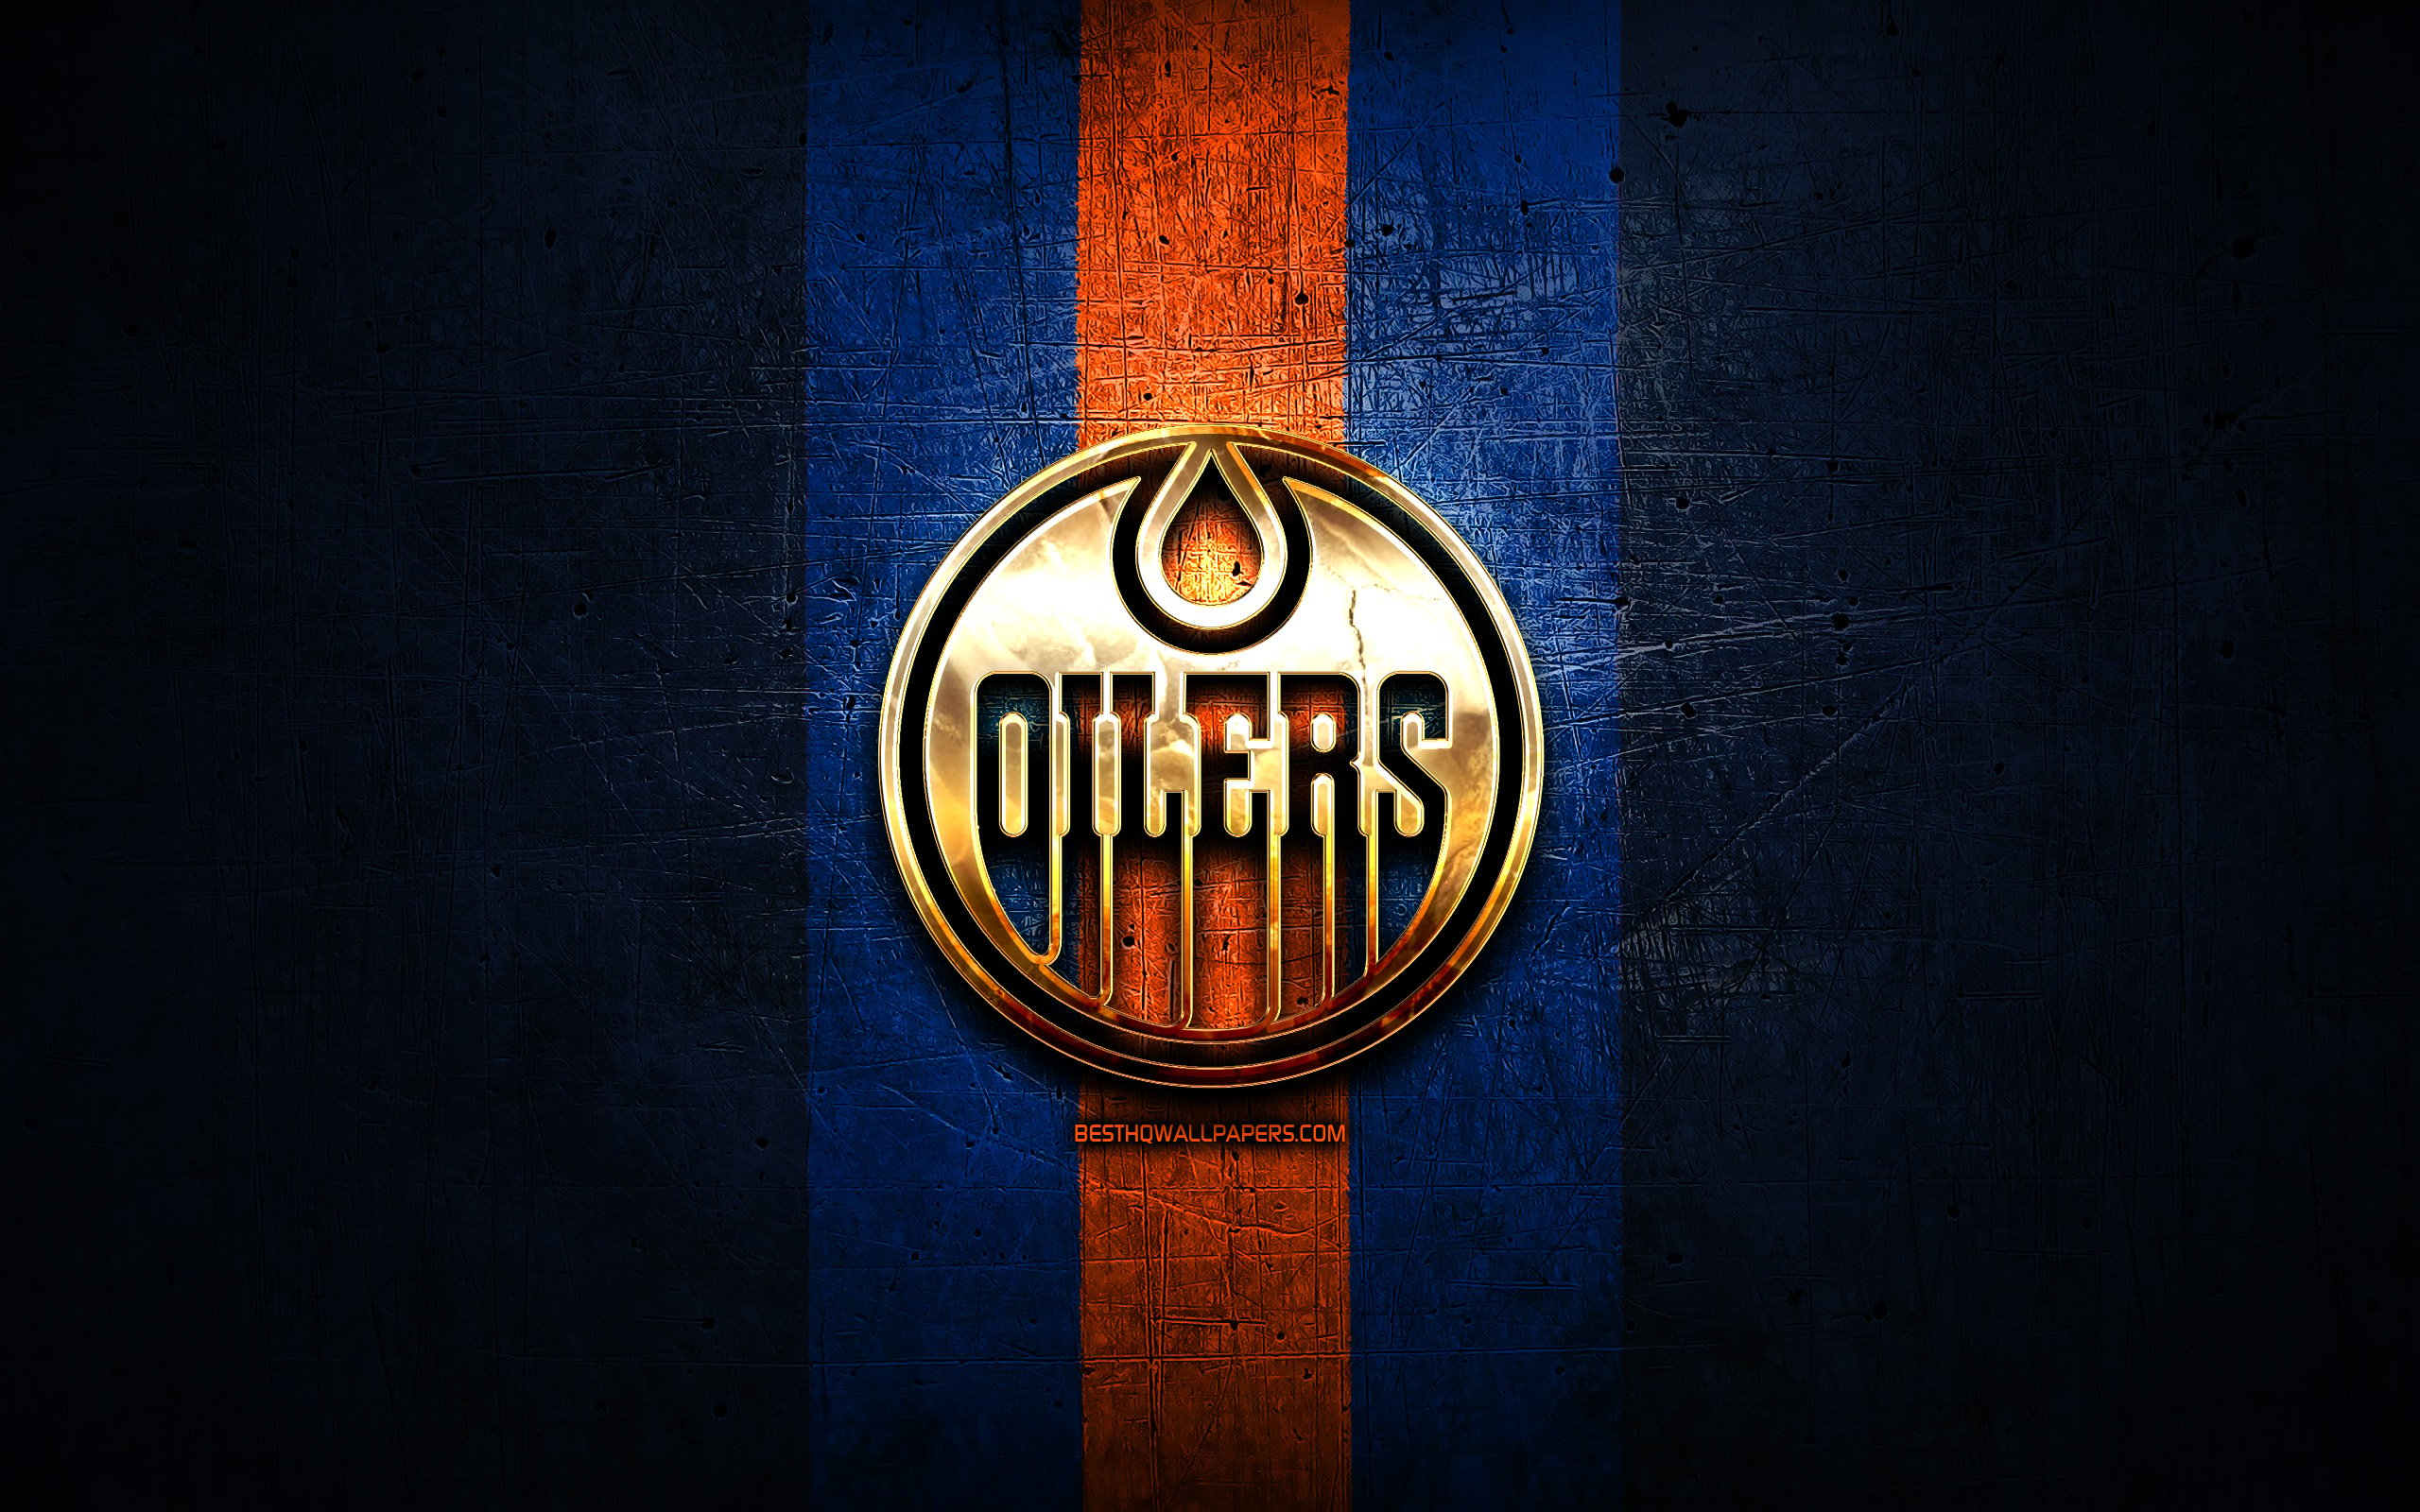 Download wallpaper Edmonton Oilers, golden logo, NHL, blue metal background, american hockey team, National Hockey League, Edmonton Oilers logo, hockey, USA for desktop with resolution 2560x1600. High Quality HD picture wallpaper